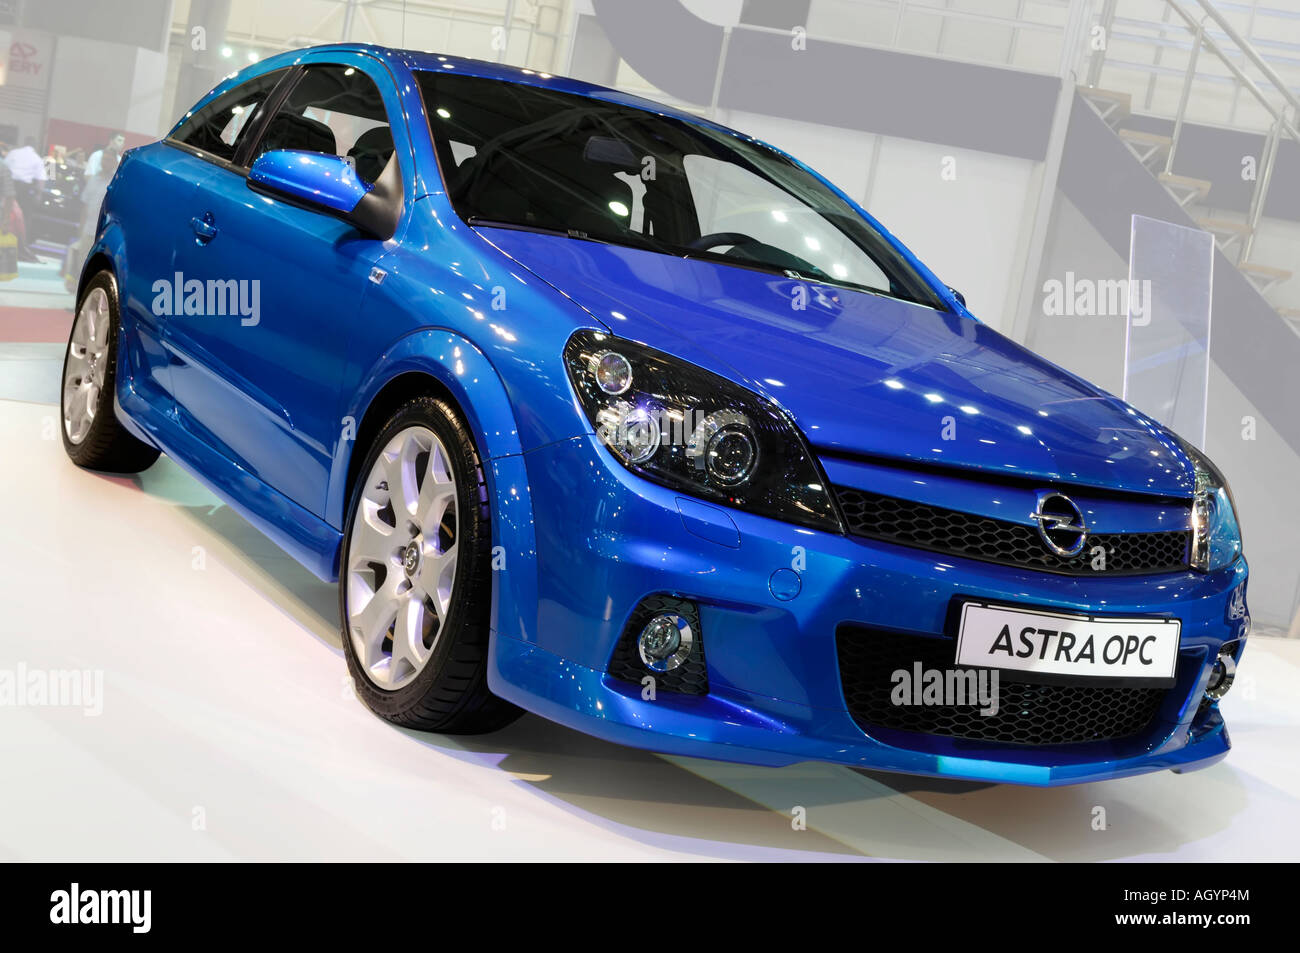 Blue Opel Astra OPC 2006 hatchback car at motor show Stock Photo